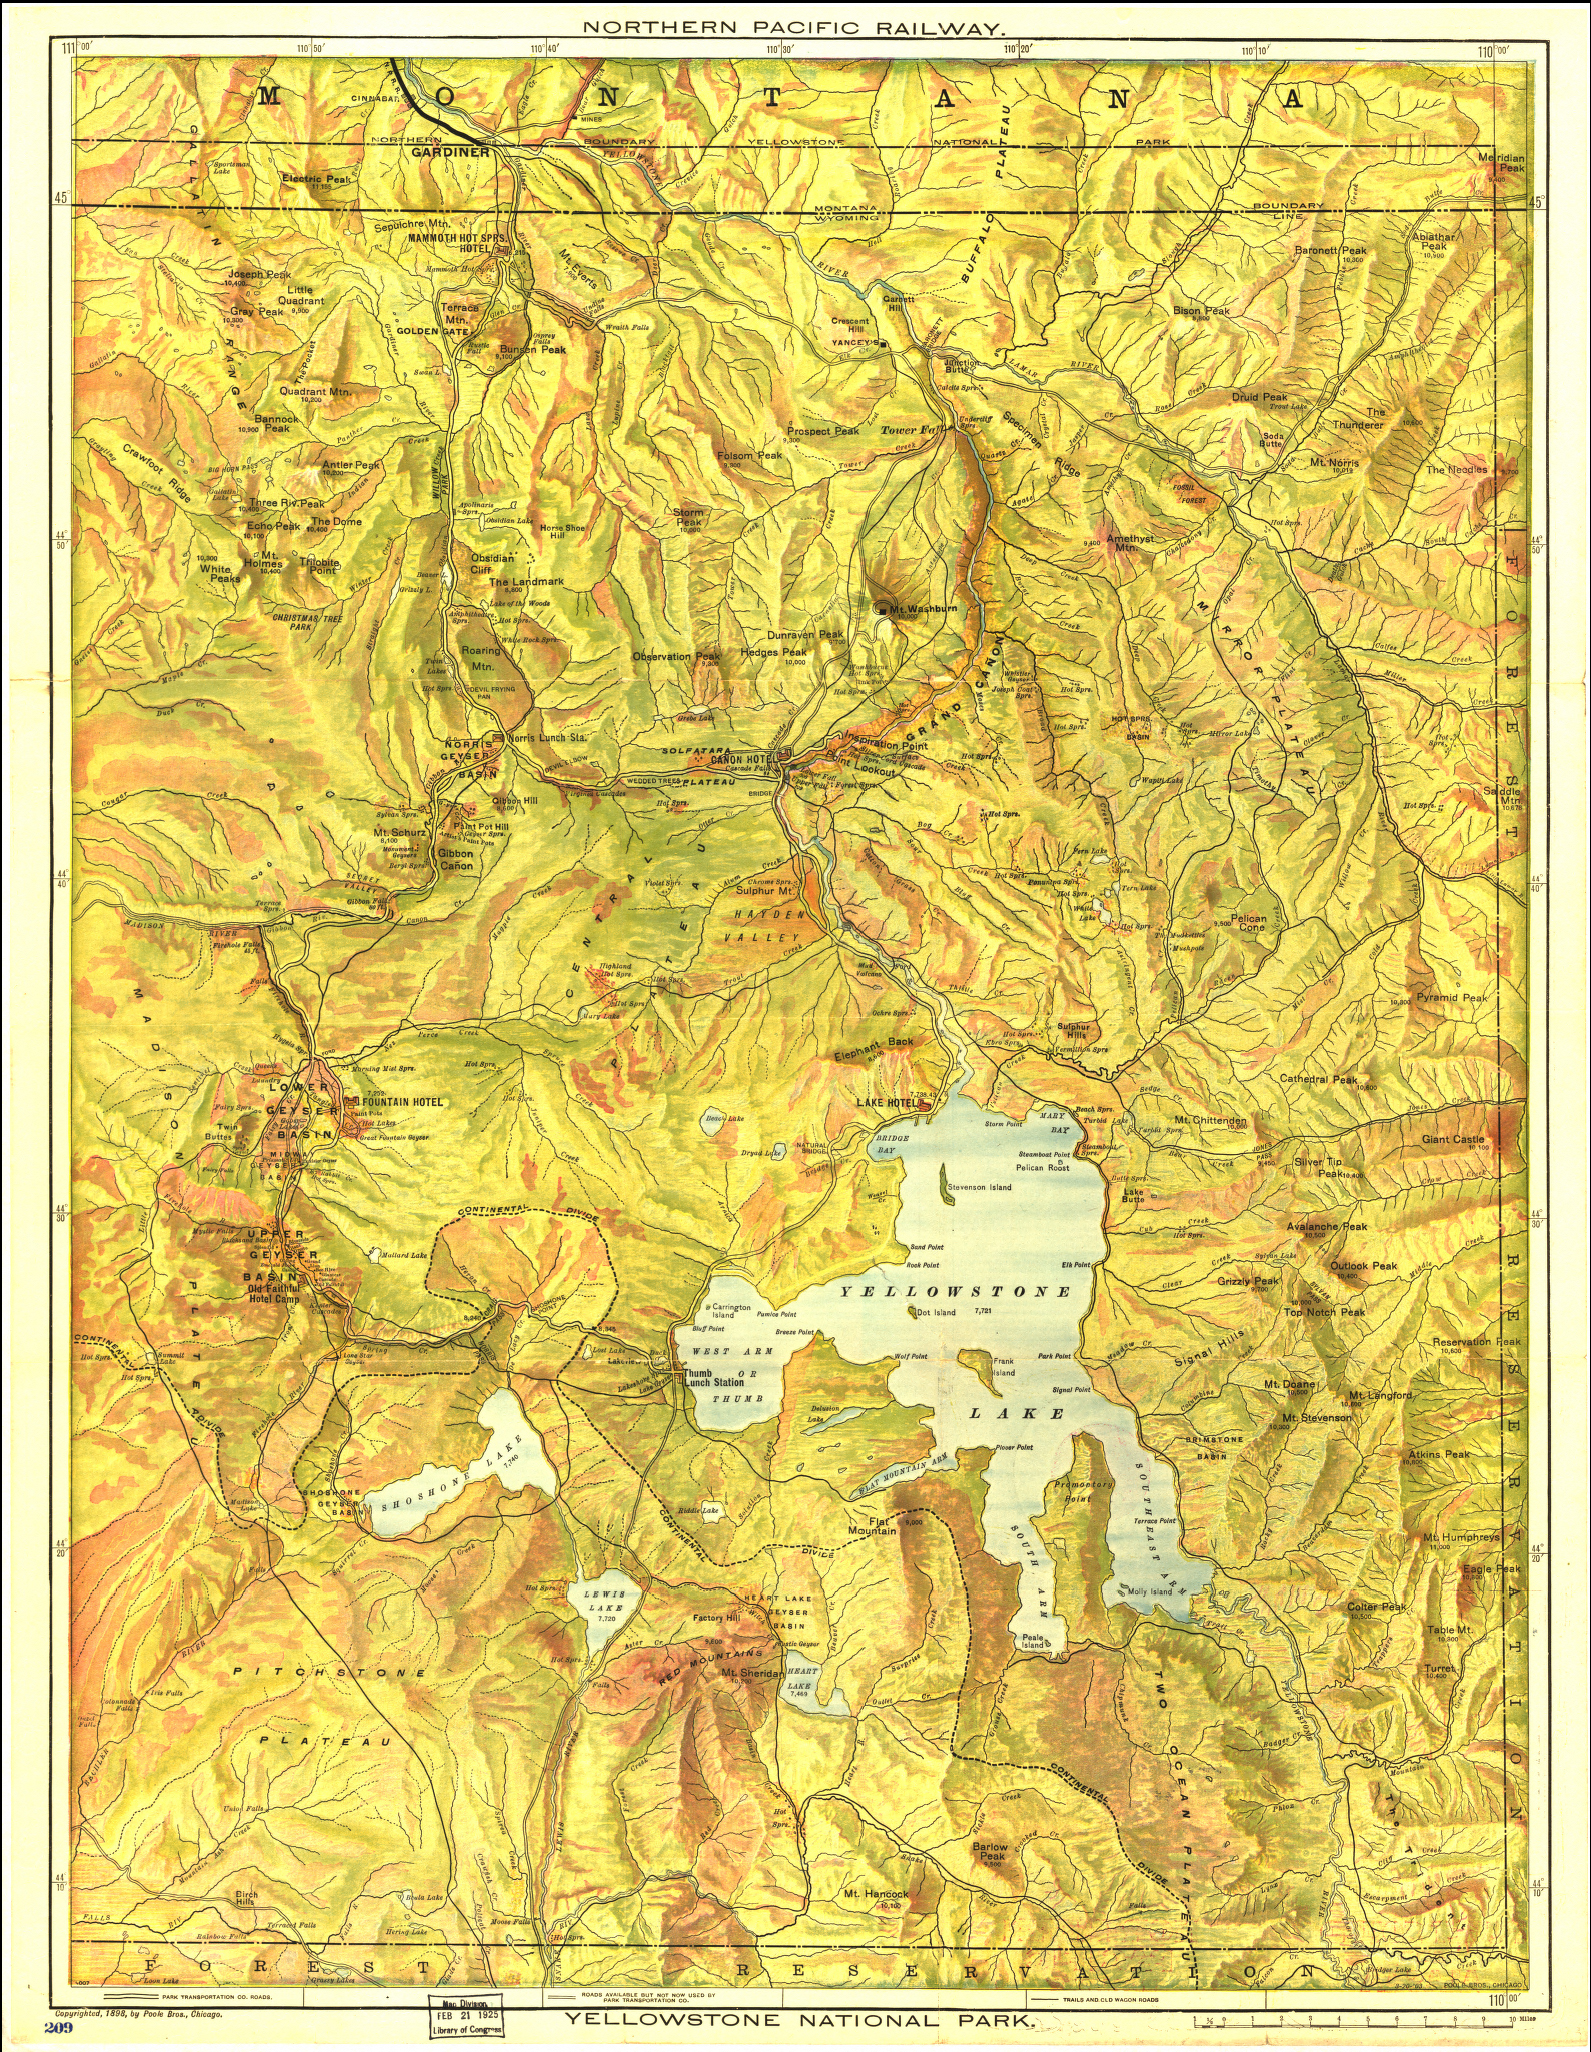 Yellowstone National Park Northern Pacific 1898 Map from the Library of Congress Collection